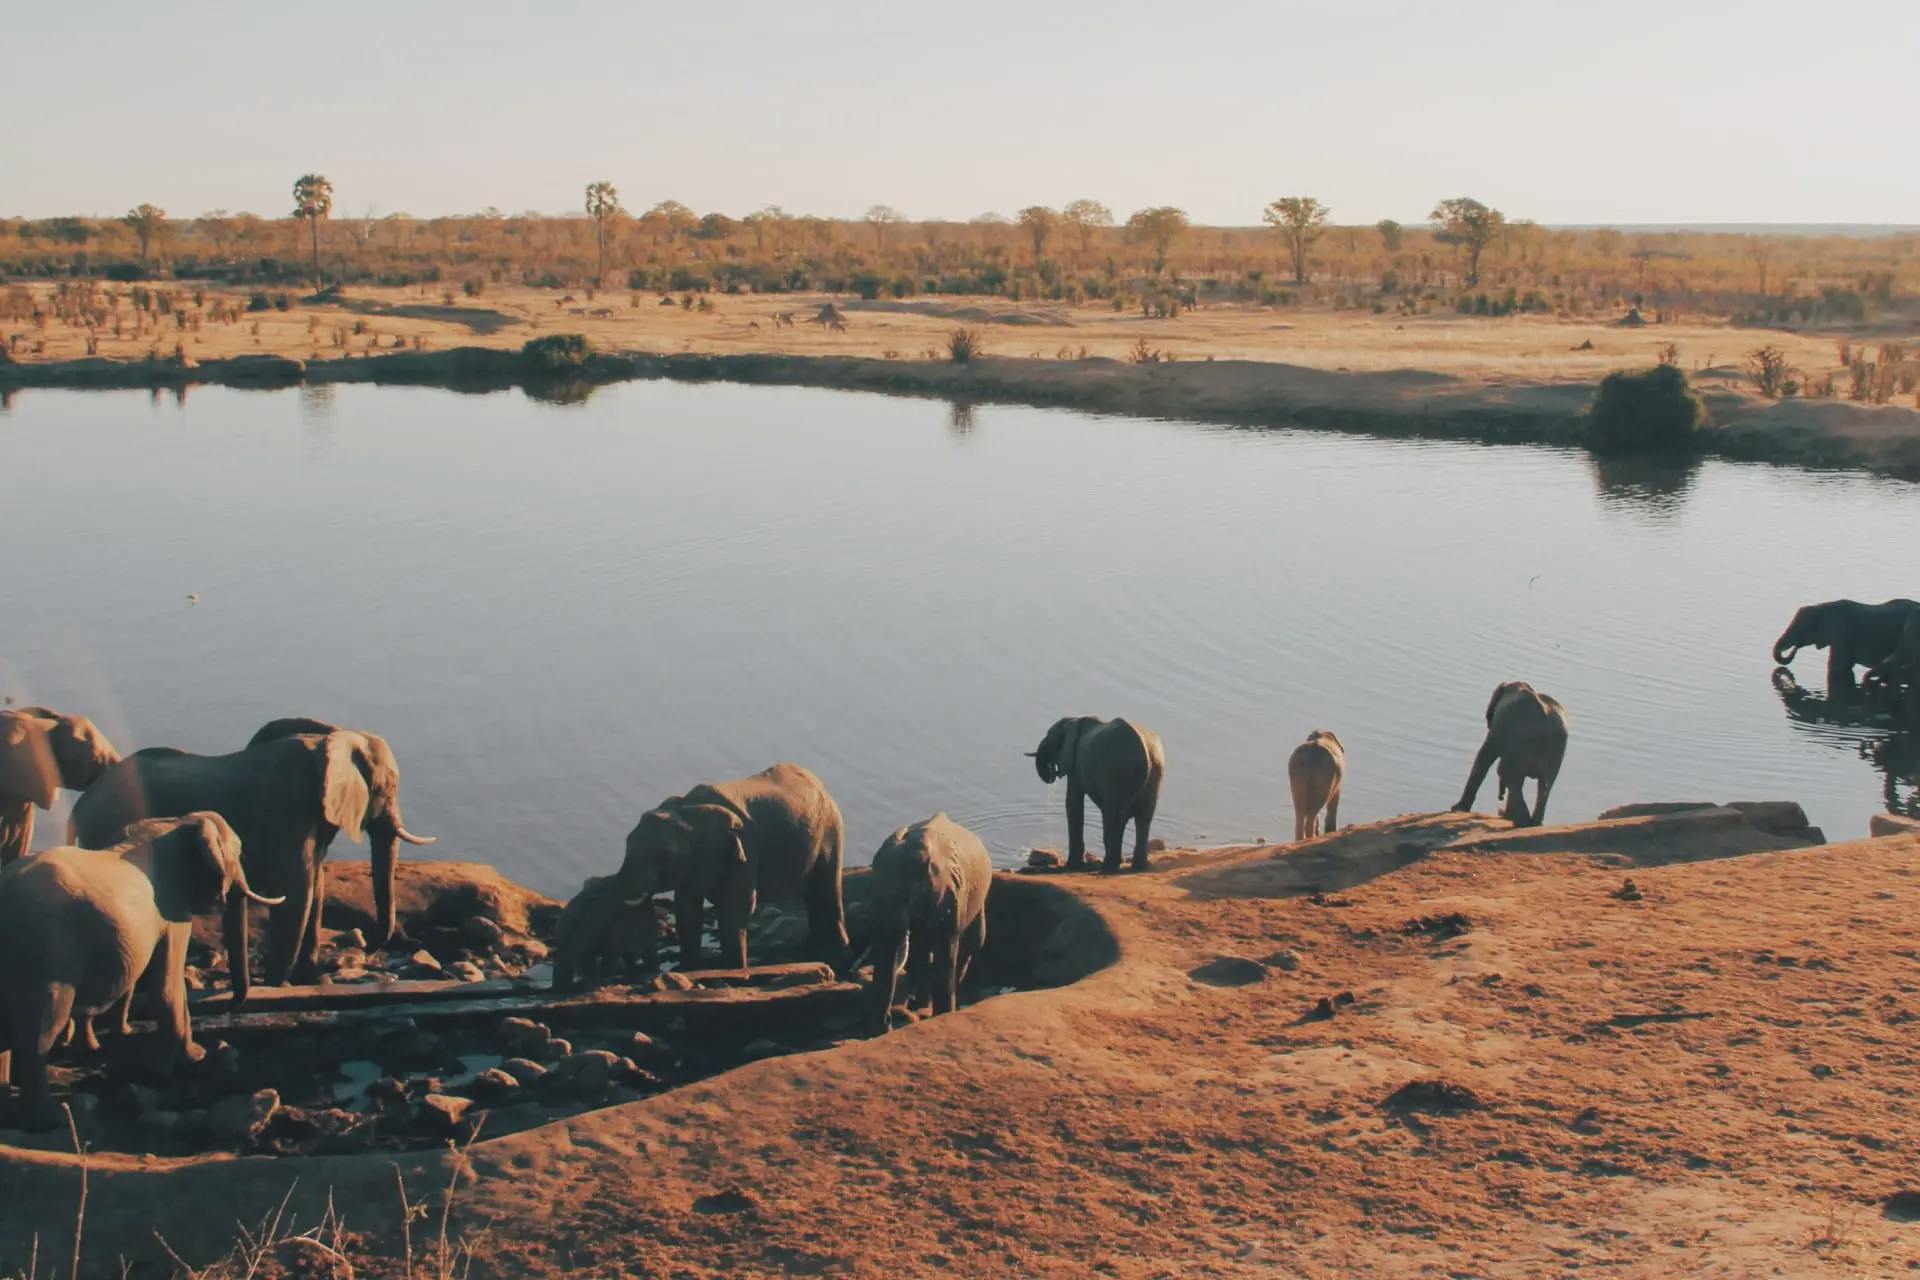 A group of elephants drinking from a body of water.